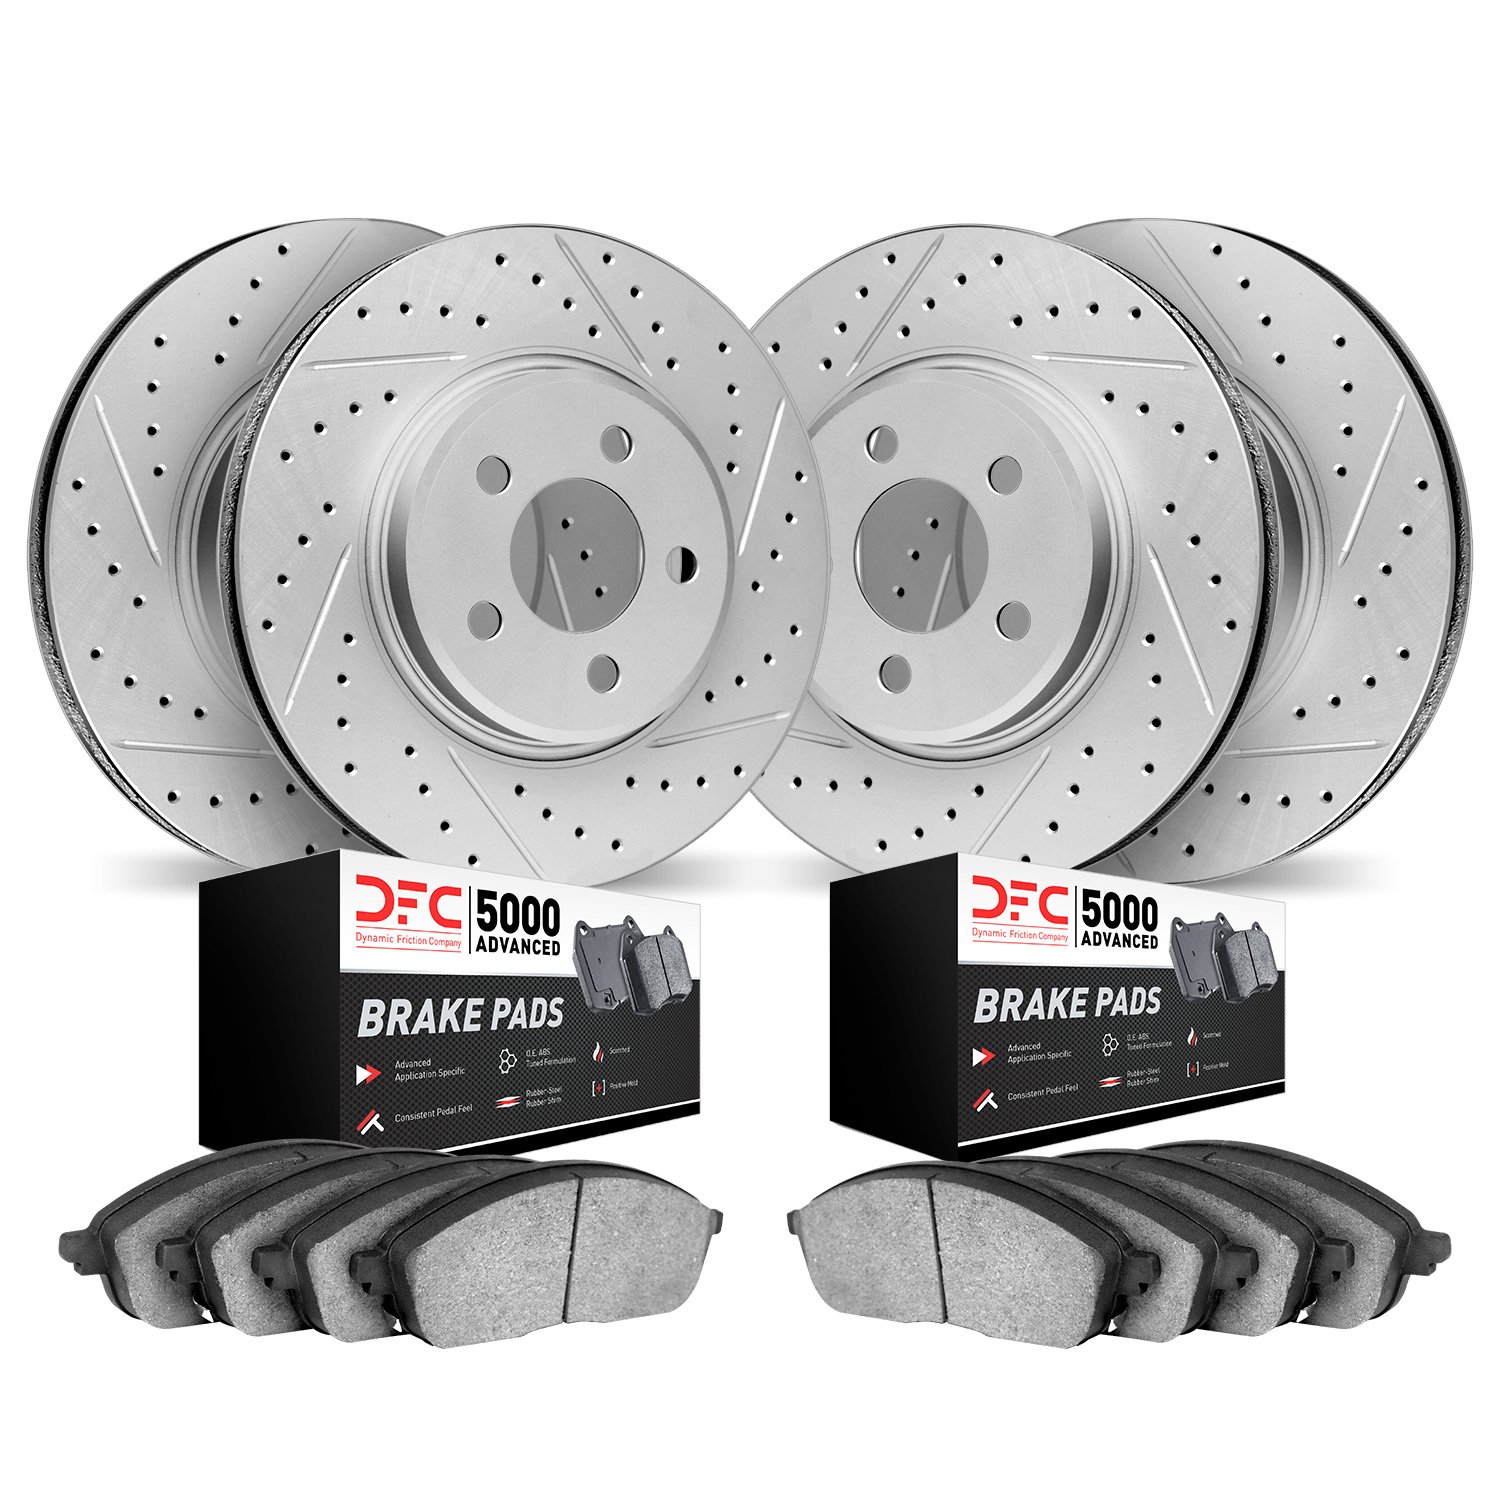 2504-13016 Geoperformance Drilled/Slotted Rotors w/5000 Advanced Brake Pads Kit, Fits Select Subaru, Position: Front and Rear